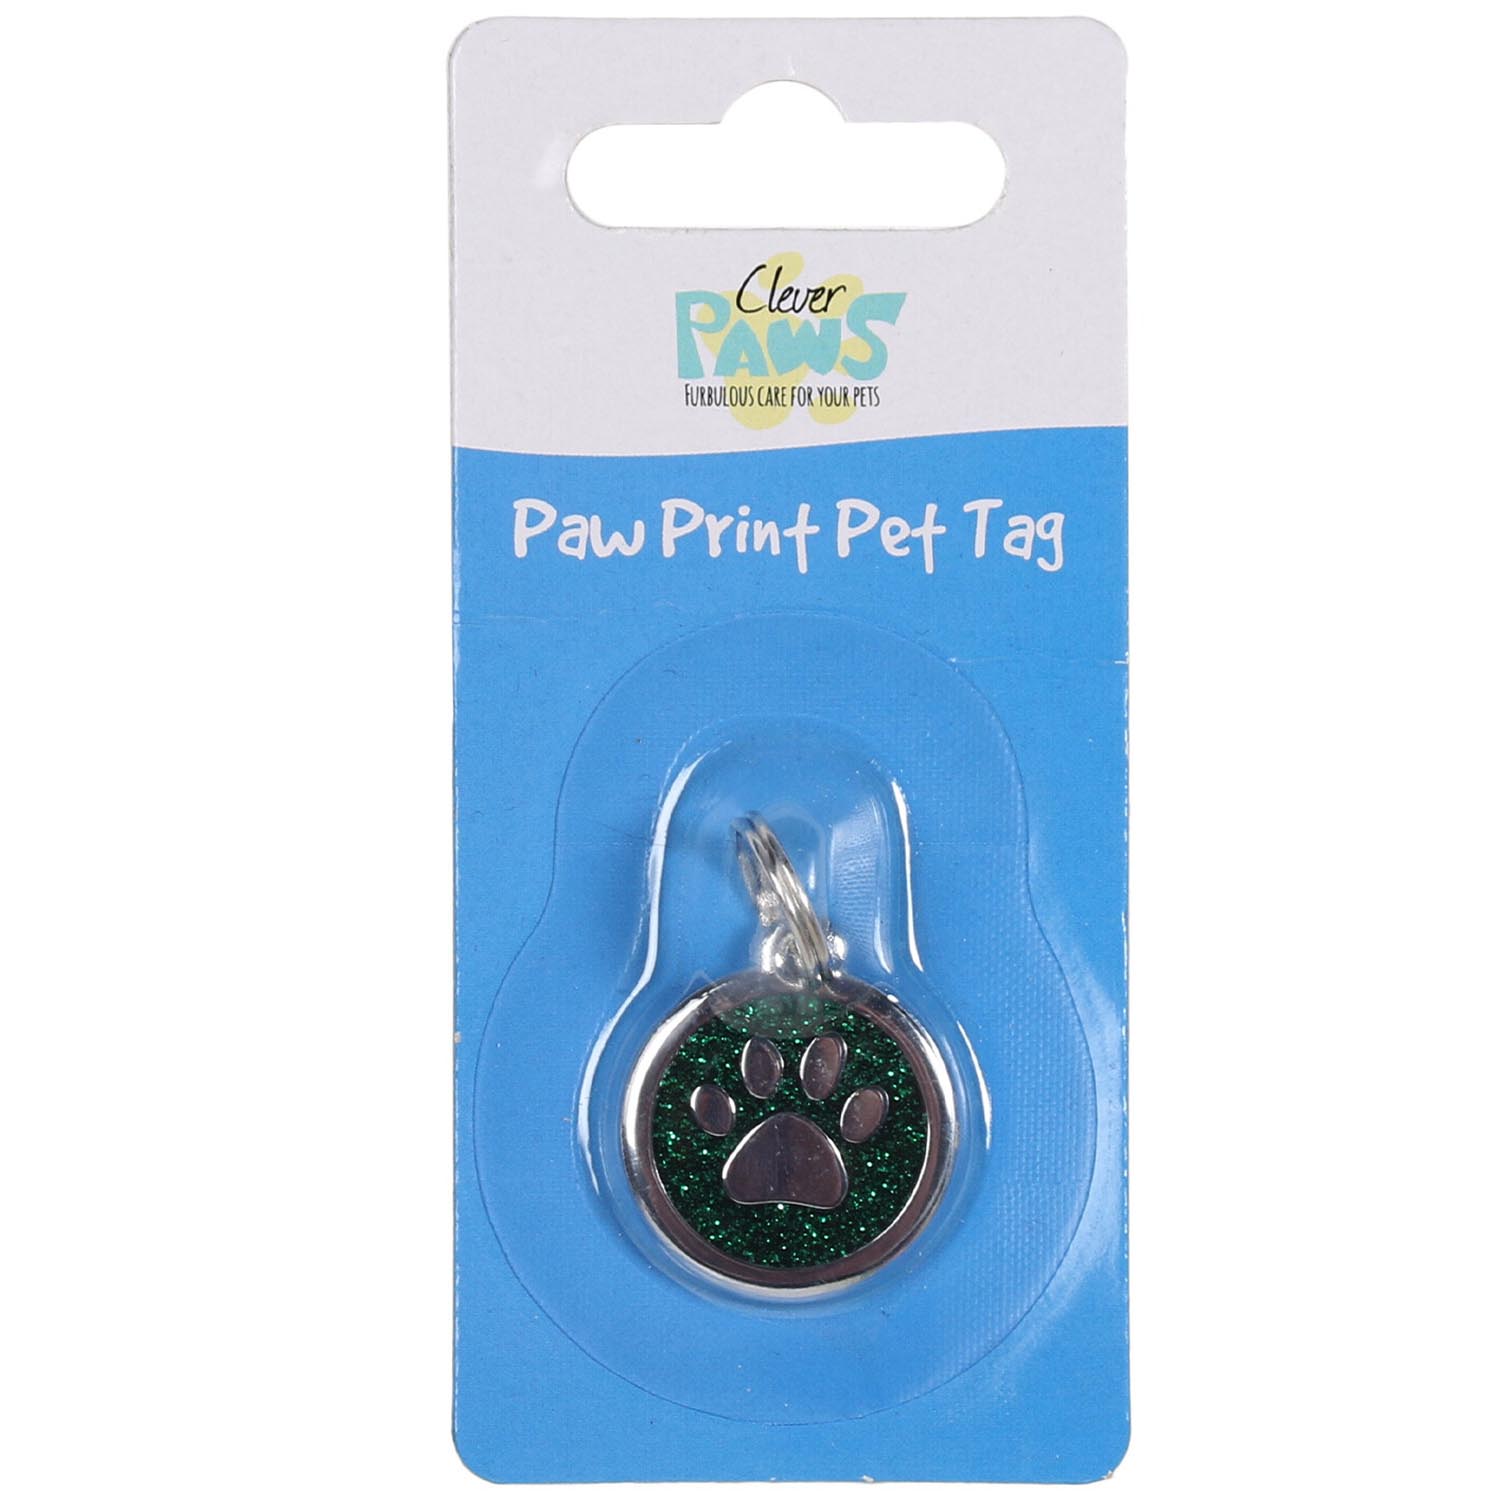 Clever Paws Pet Tag Image 2